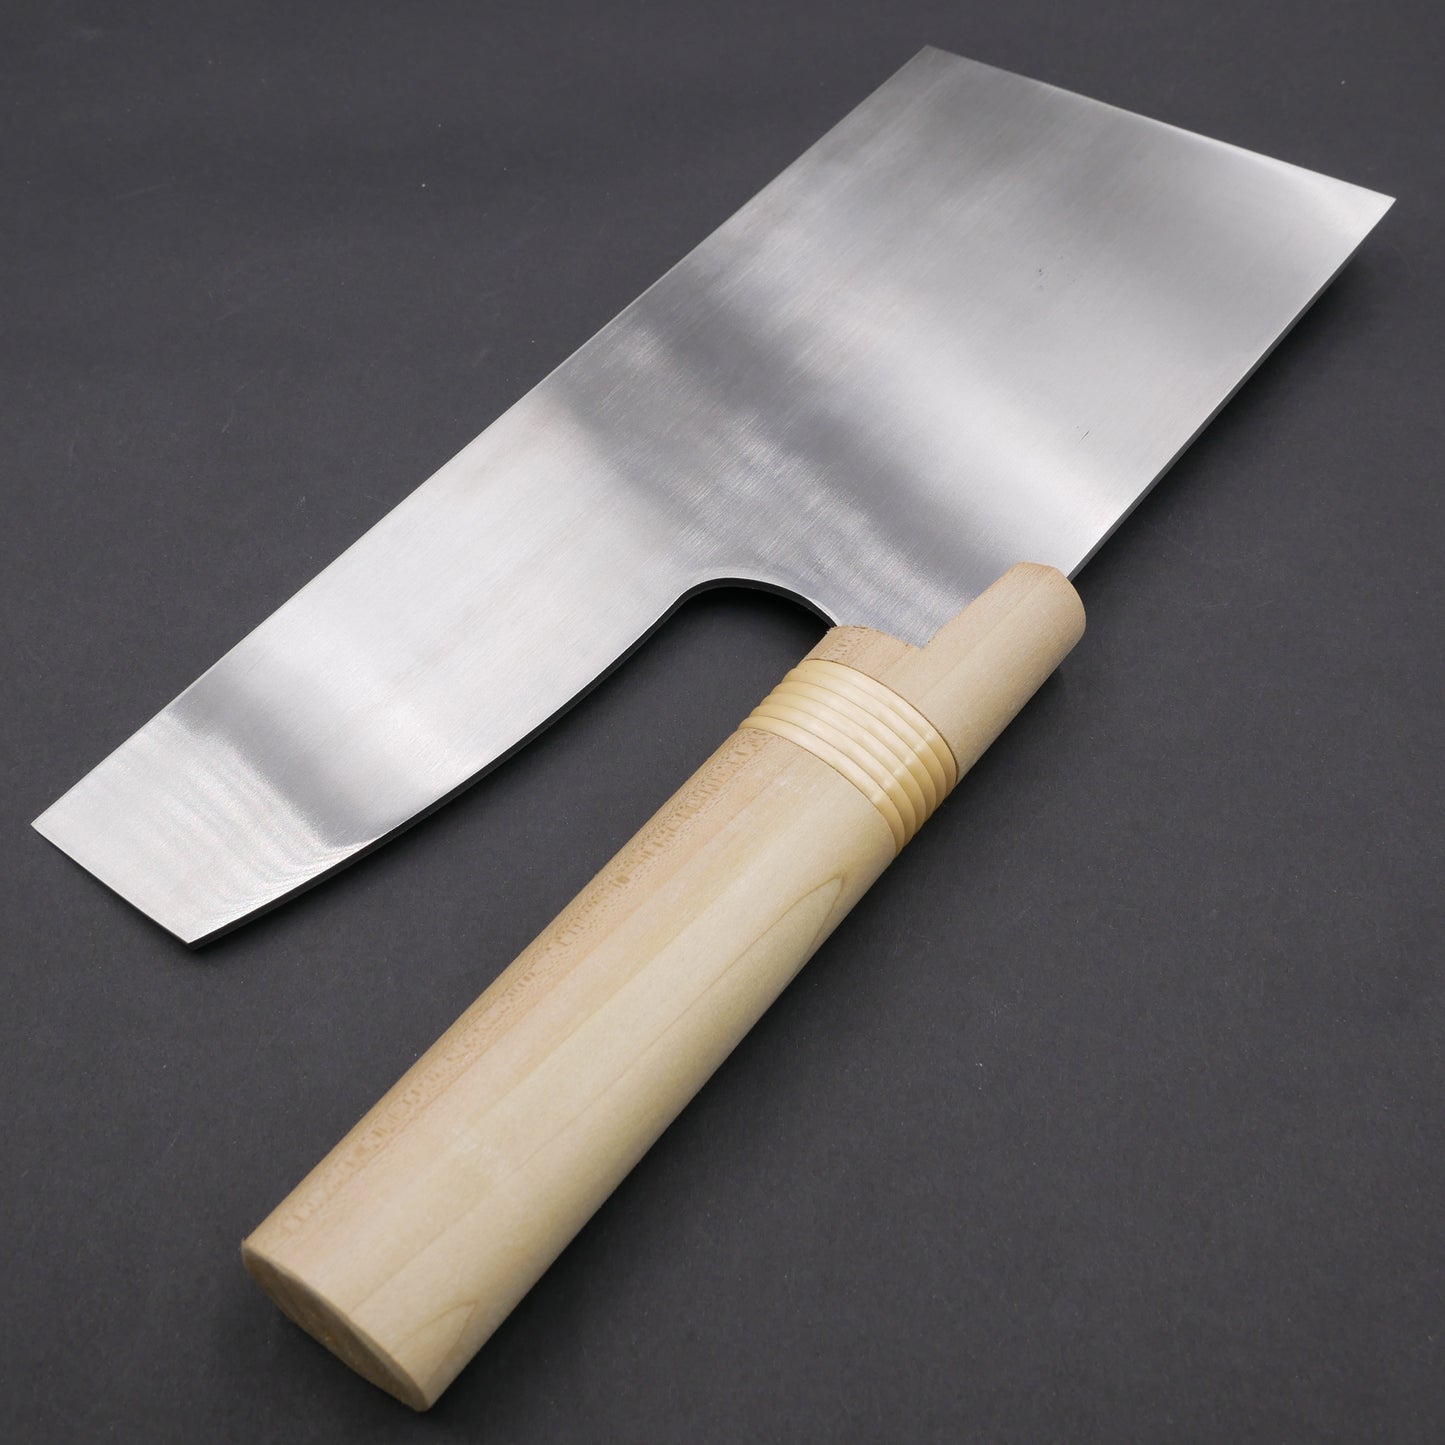 Molybdenum Stainless Steel Noodle Knife Japanese Handle